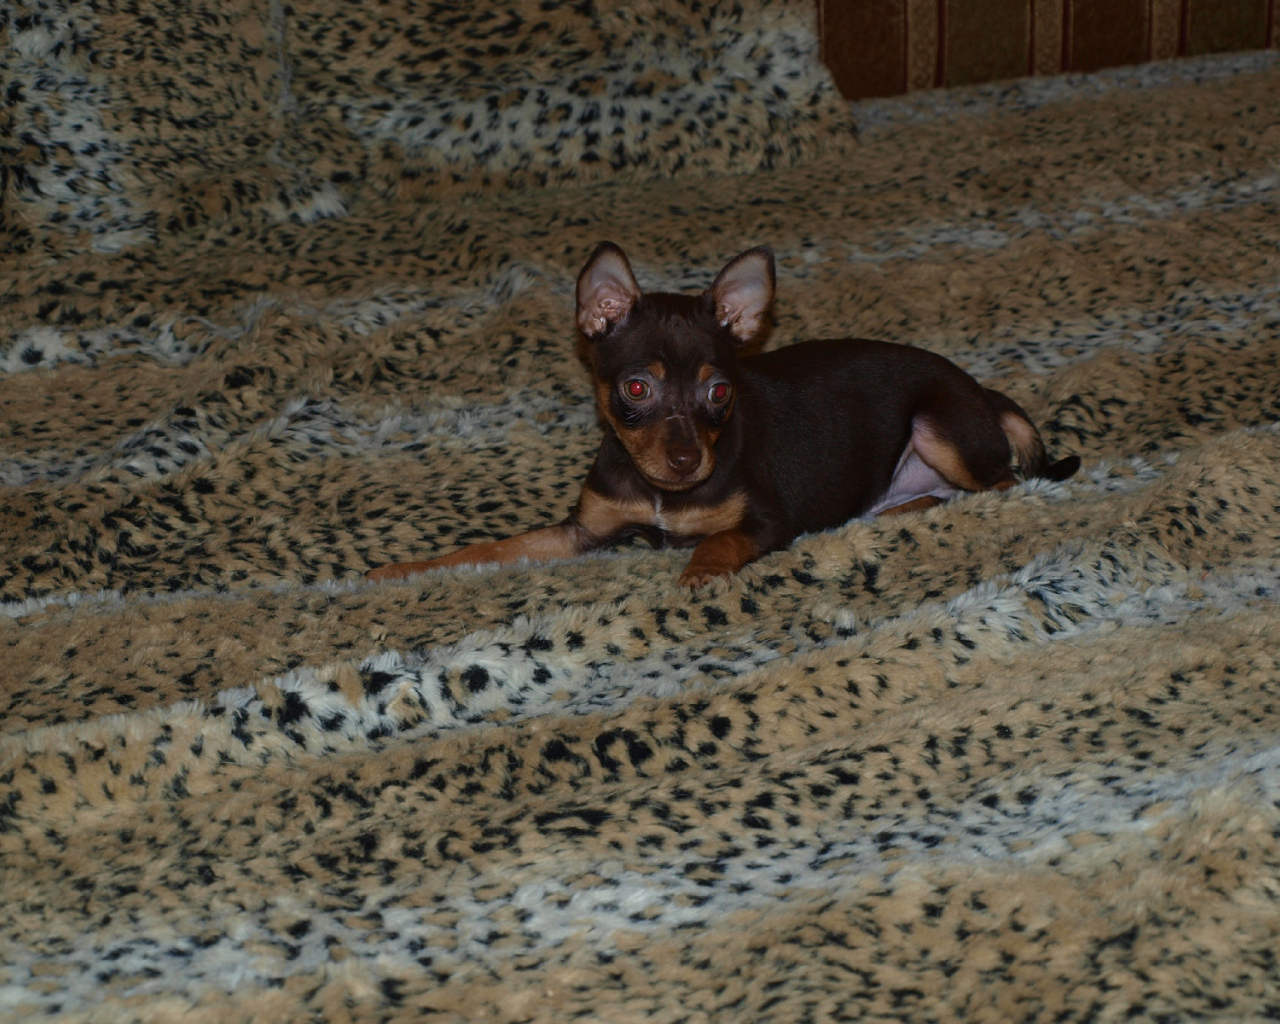 Baby Miniature Pinscher on the bed